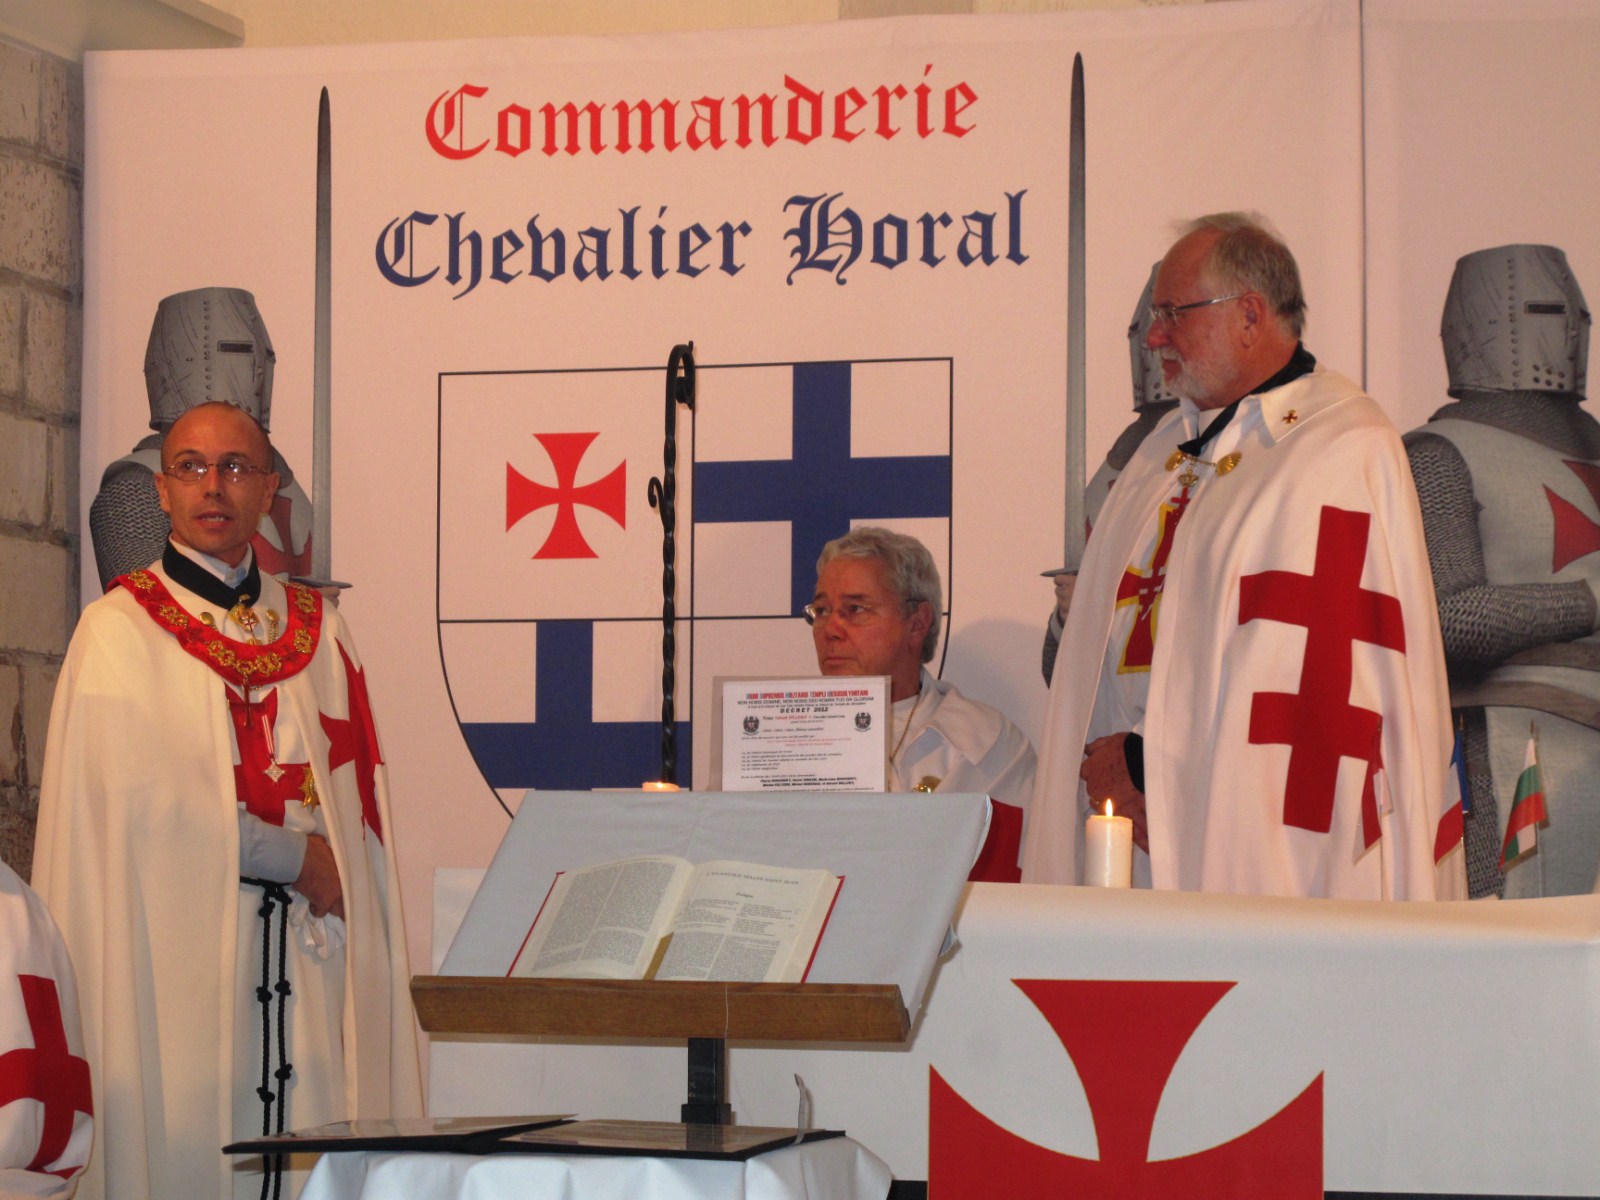 CHEVALIER HORAL